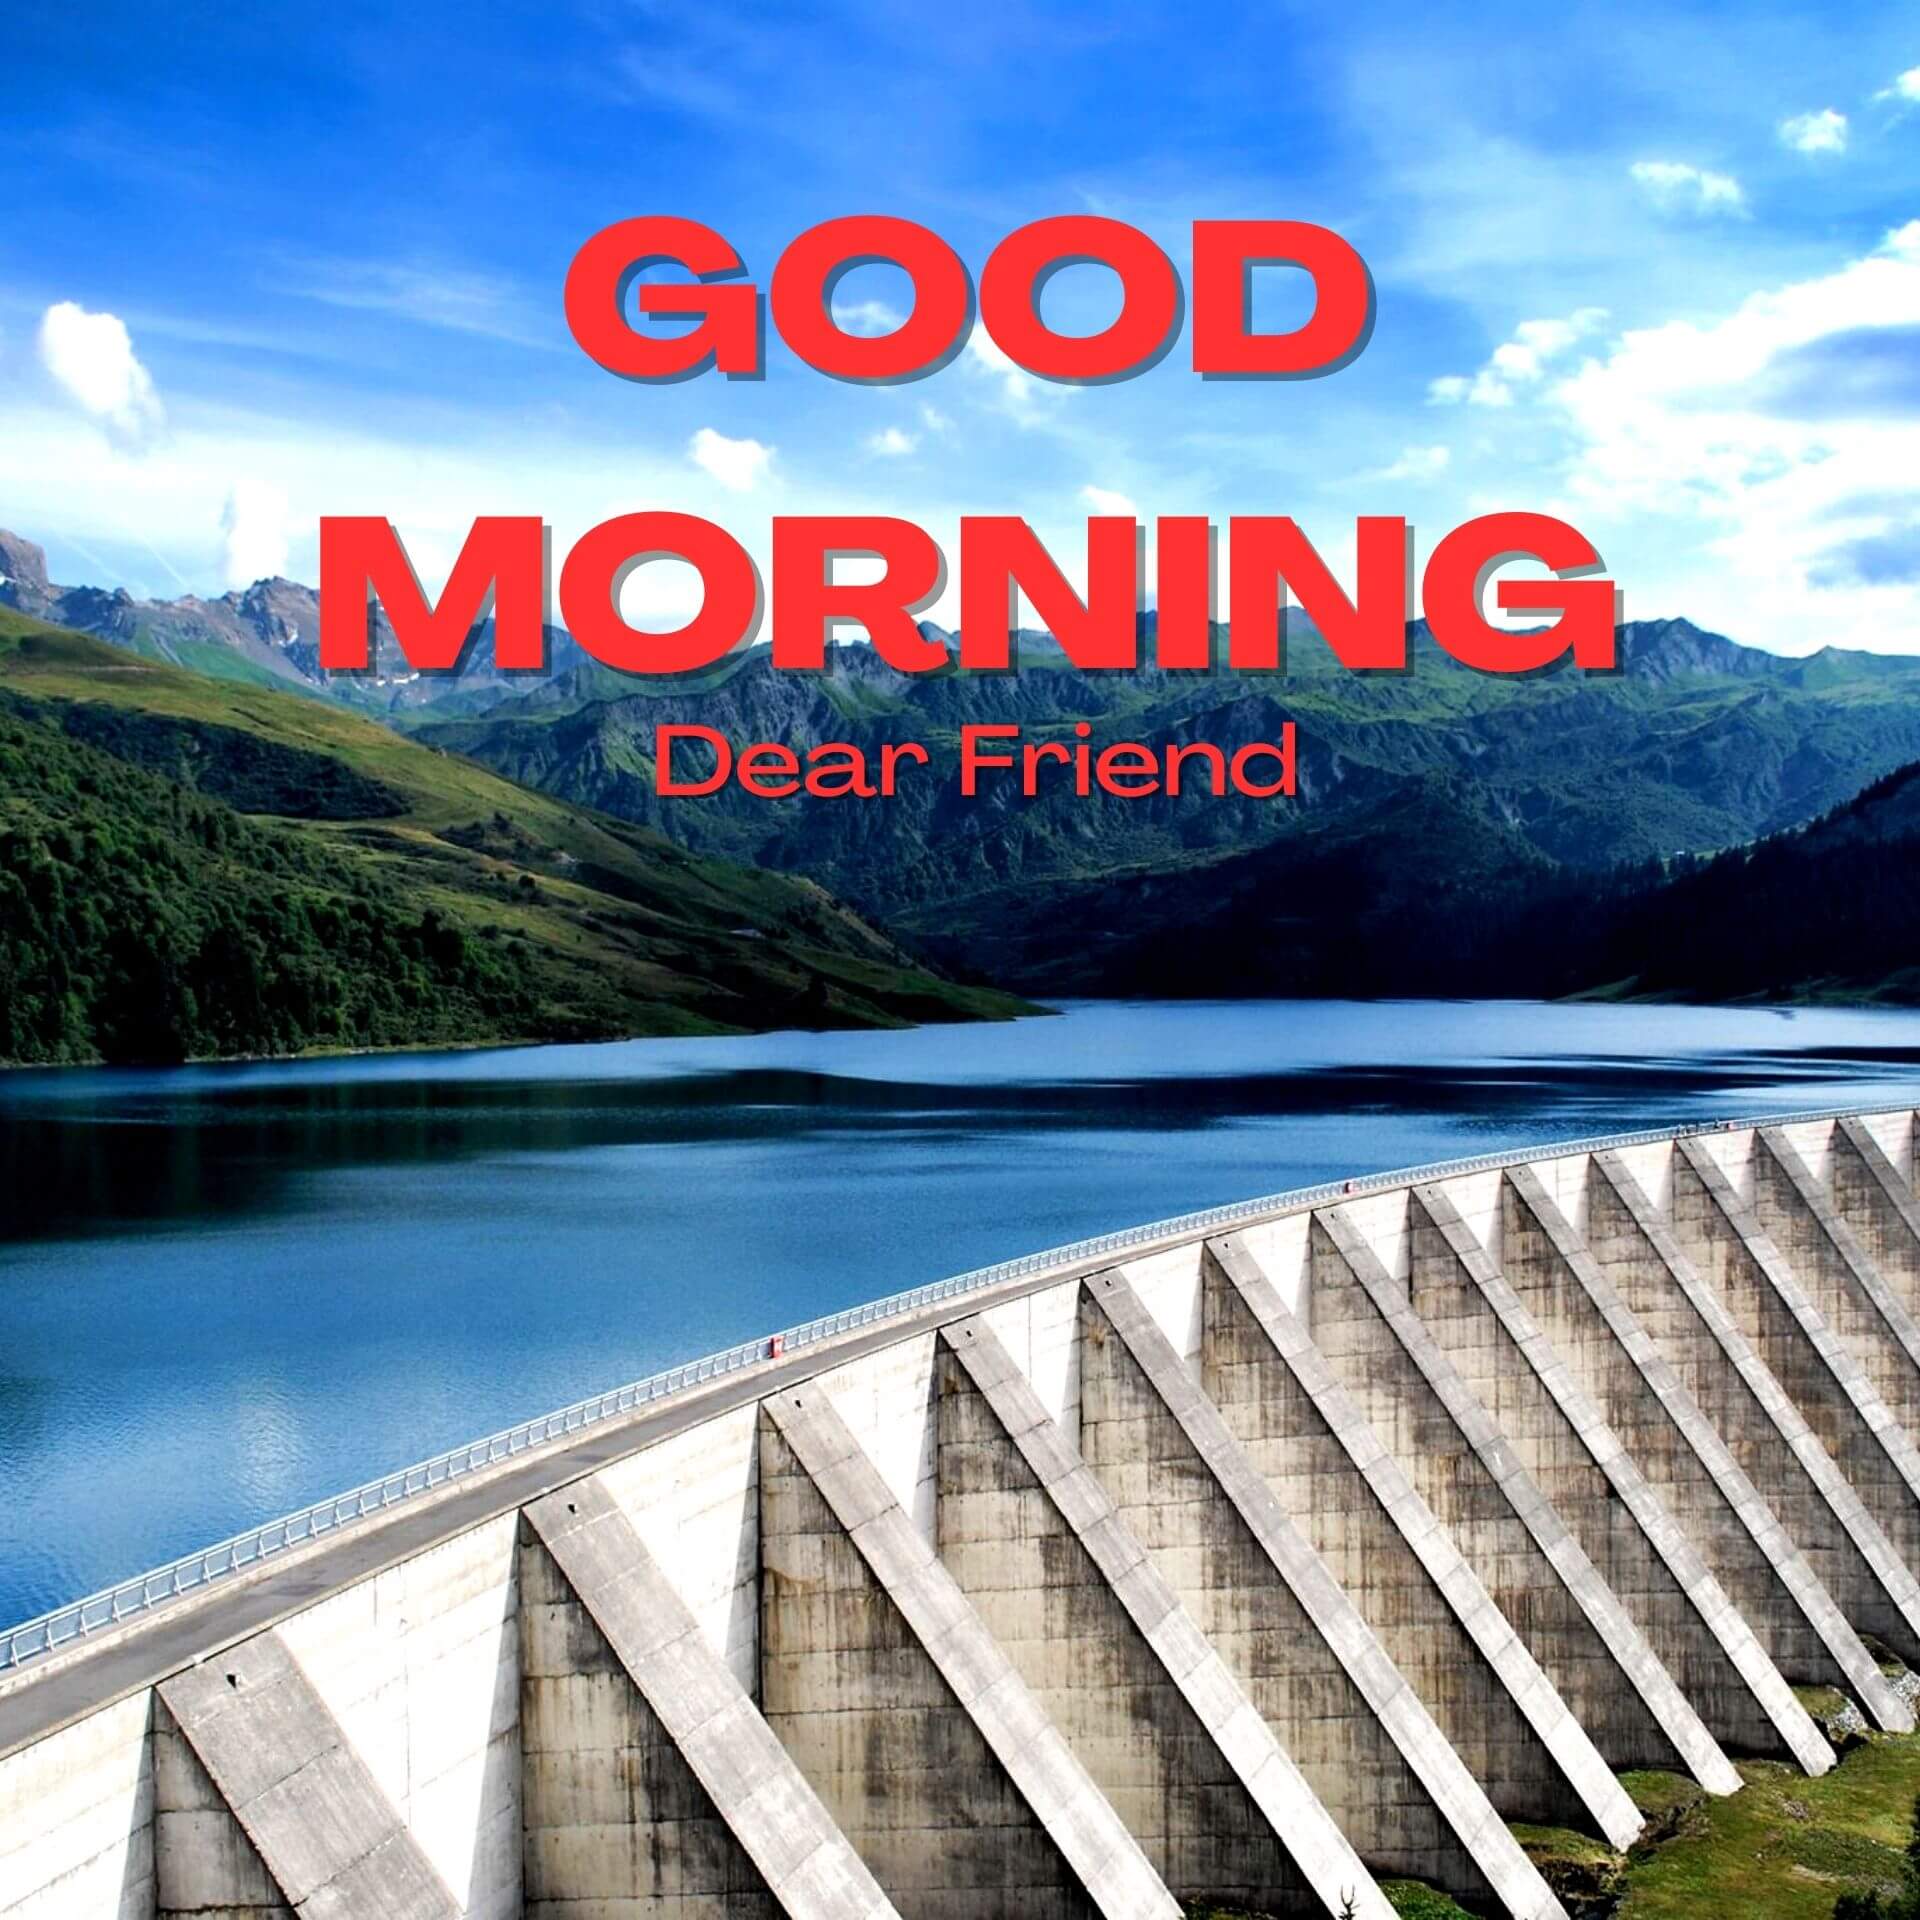 Good Morning 1080p Pics Images Download for Facebook